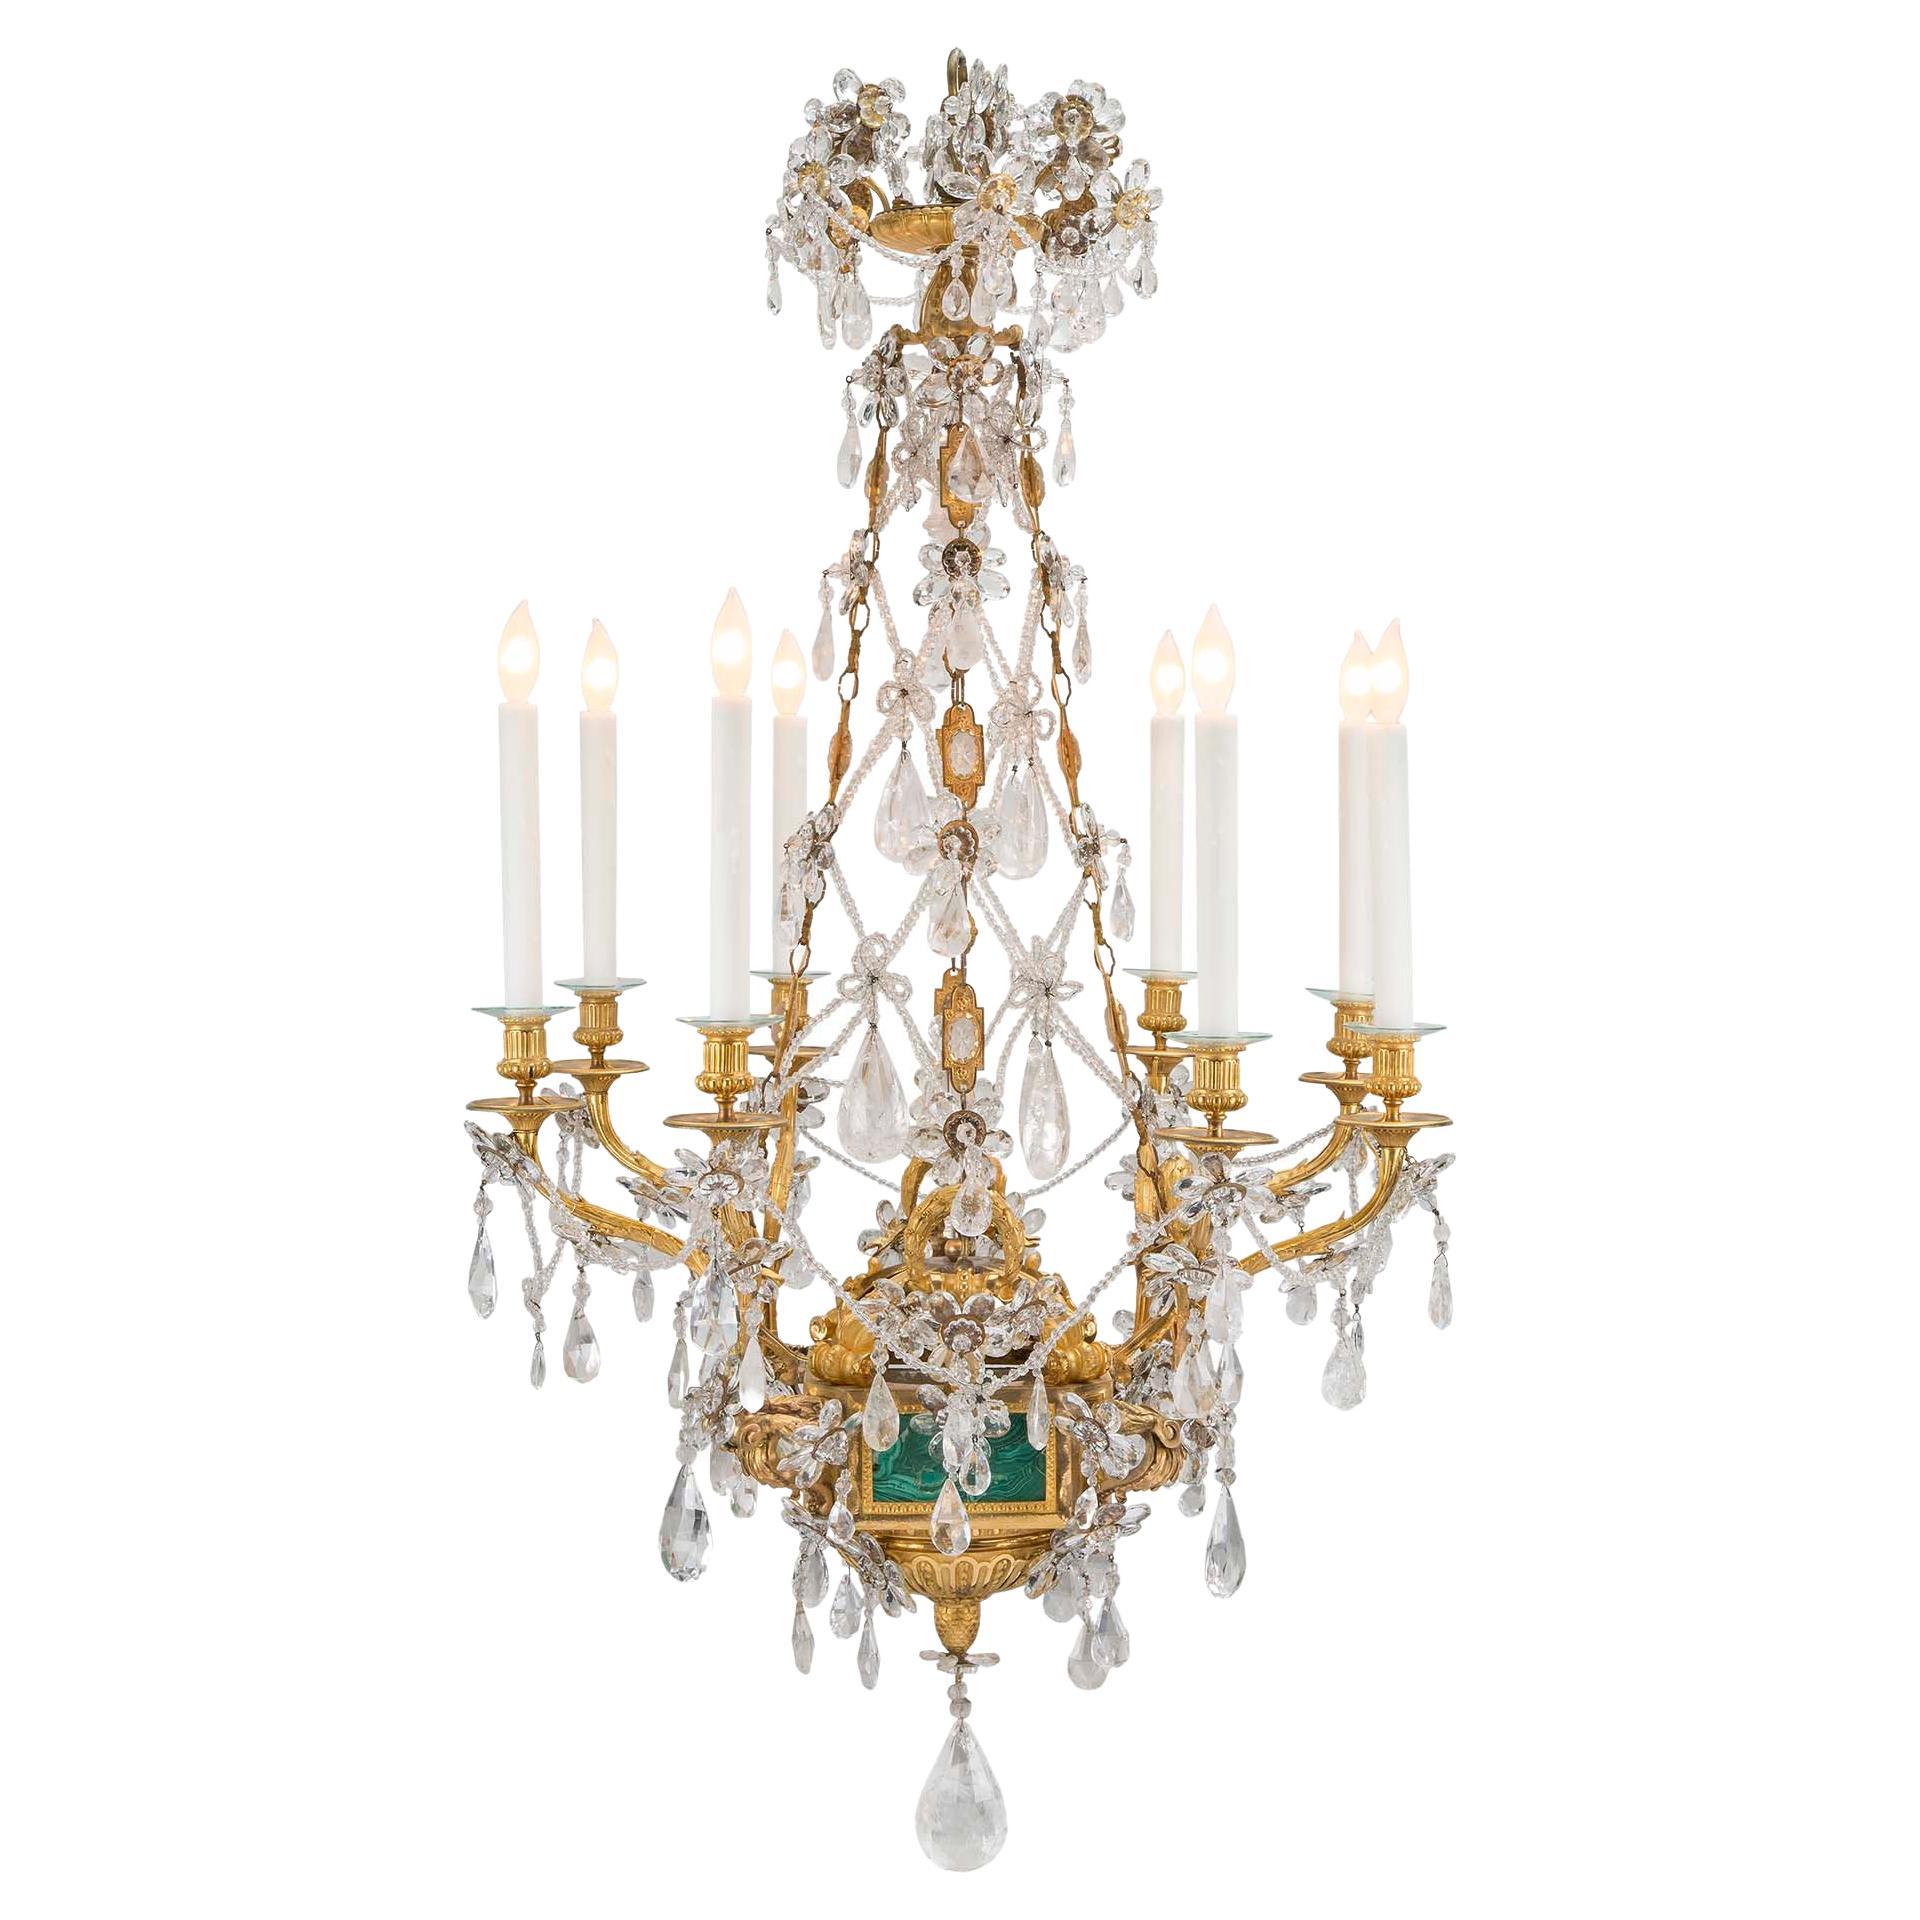  French Early 19th Century Louis XVI Style Eight-Arm Chandelier